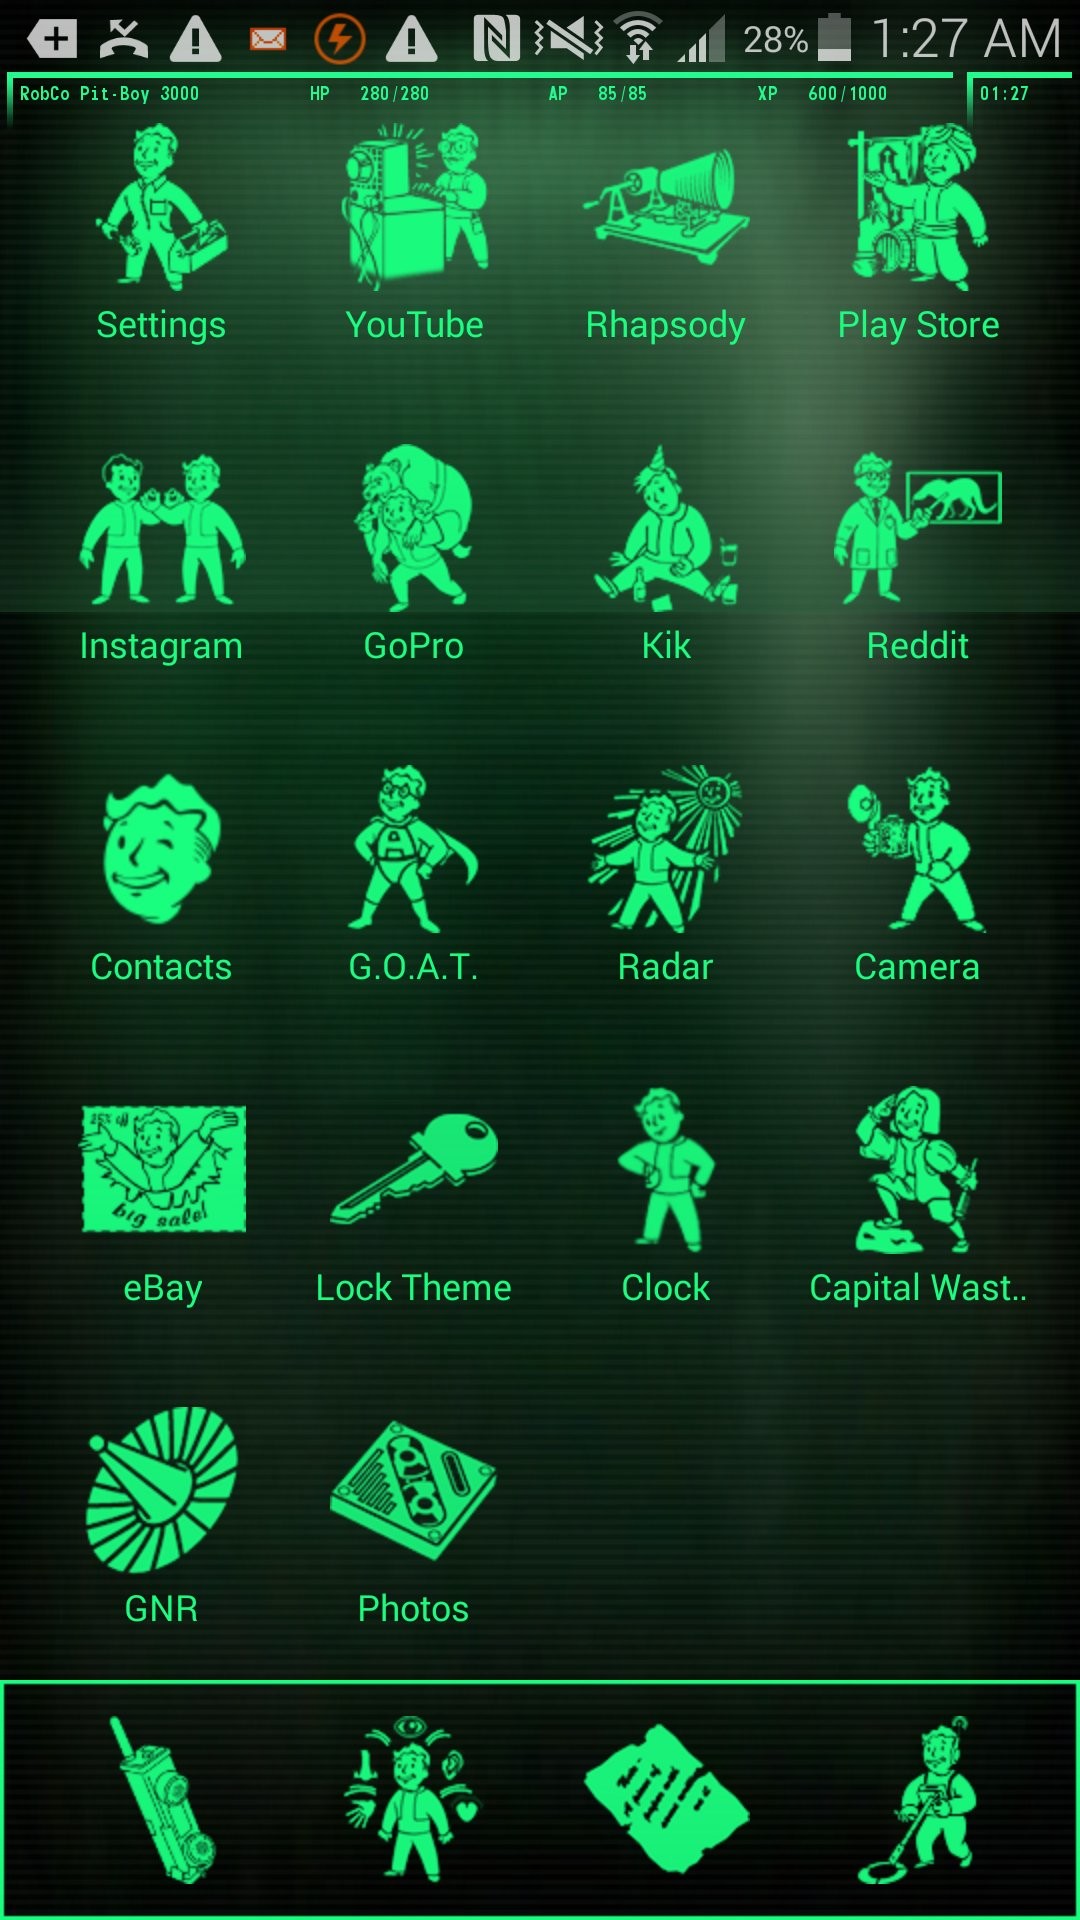 Search Results for “pip boy 3000 wallpaper” – Adorable Wallpapers